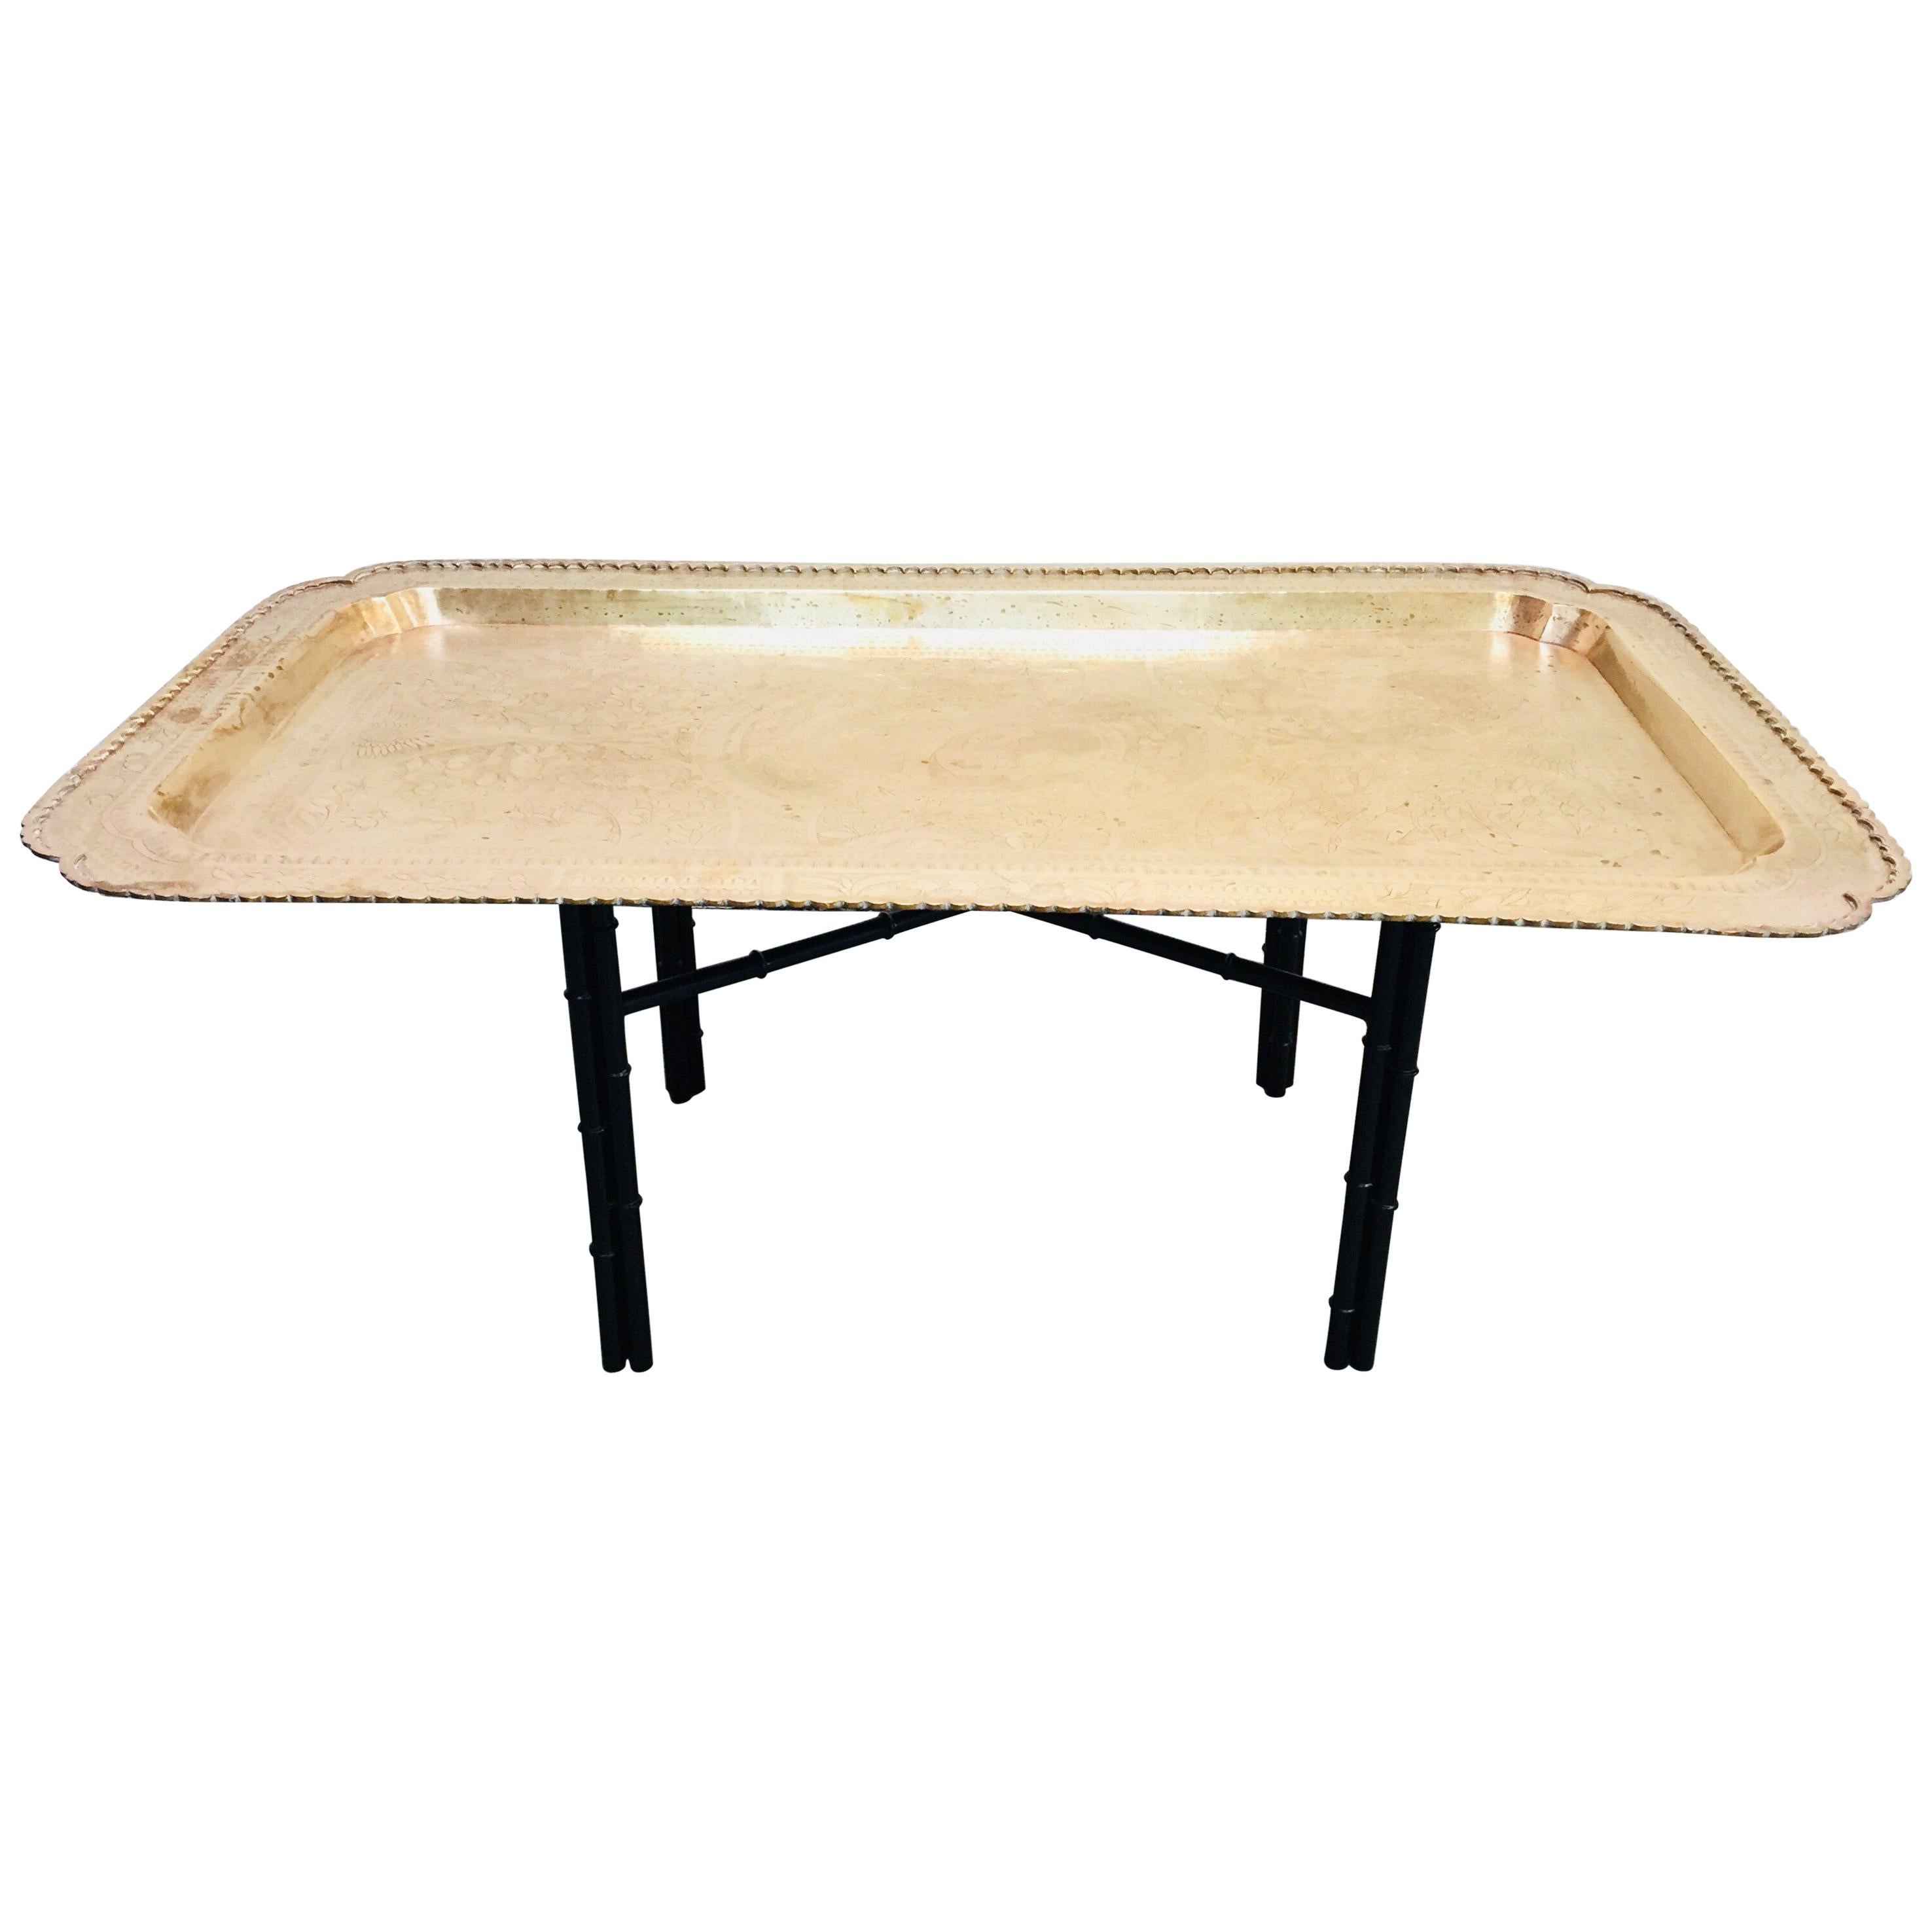 1960s Boho Chic Rectangular Brass Tray Coffee Table For Sale